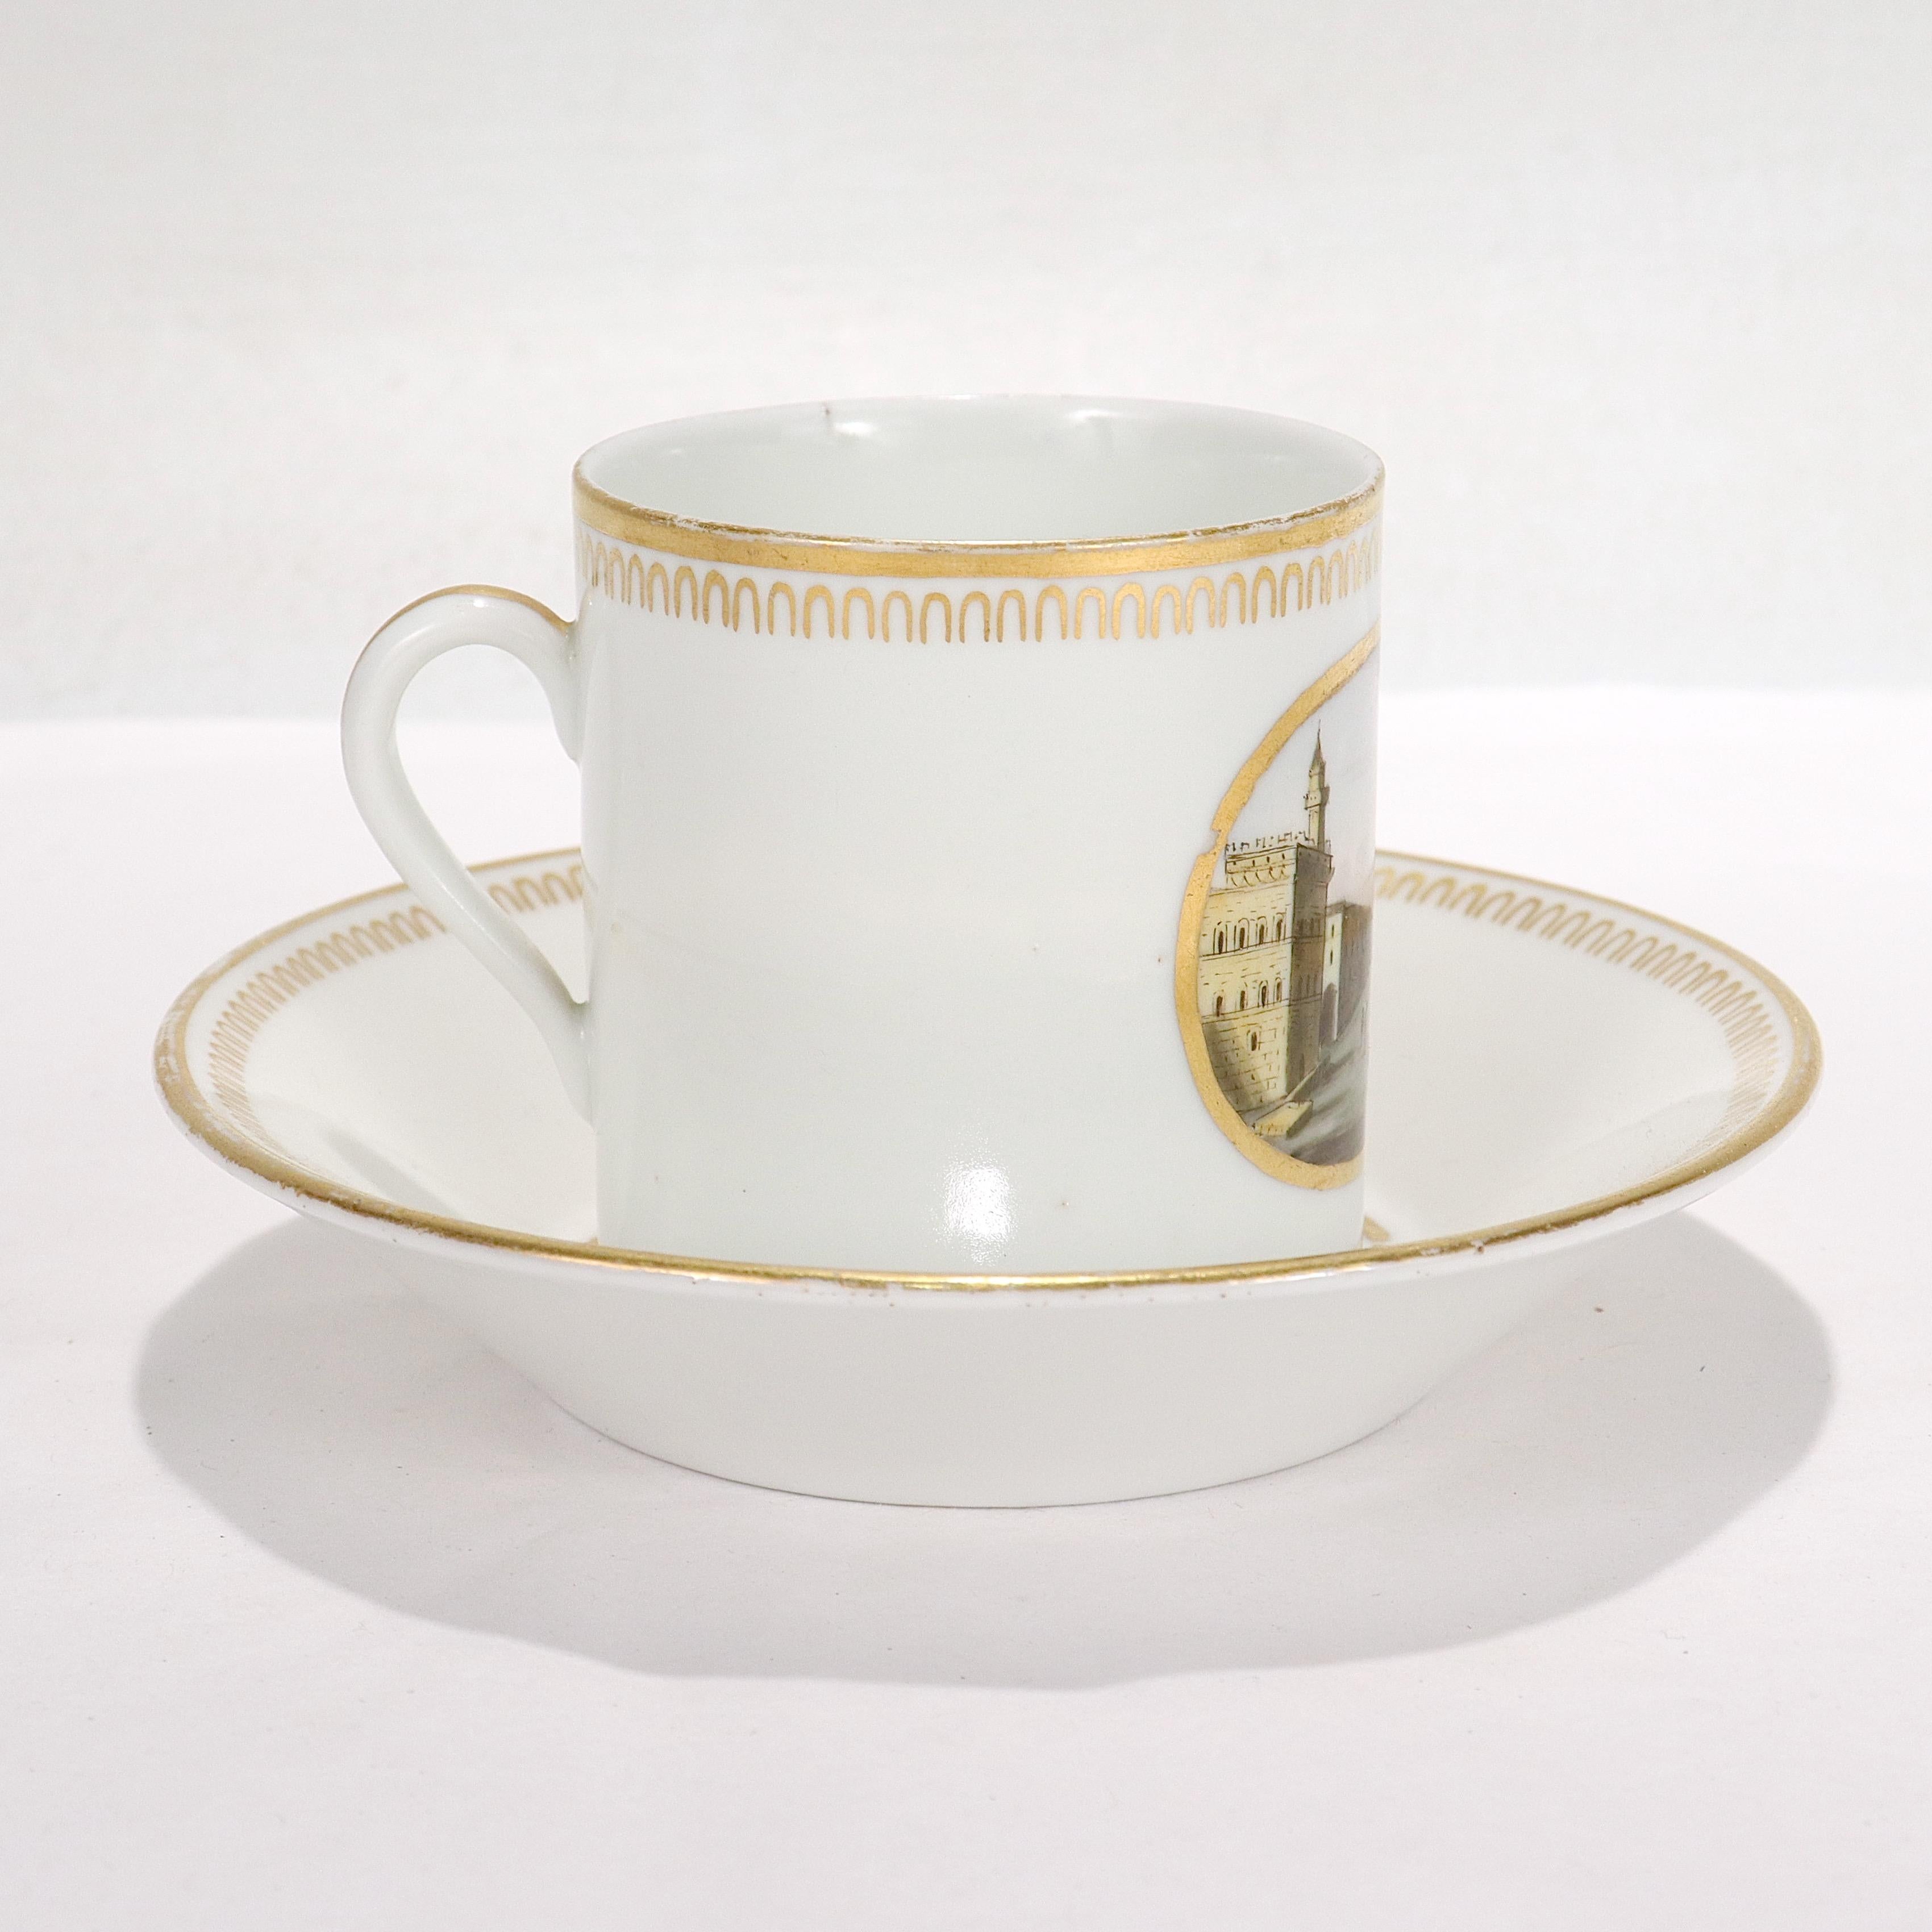 Antique Doccia Porcelain Italian Neoclassical Topographical Cup & Saucer In Good Condition For Sale In Philadelphia, PA